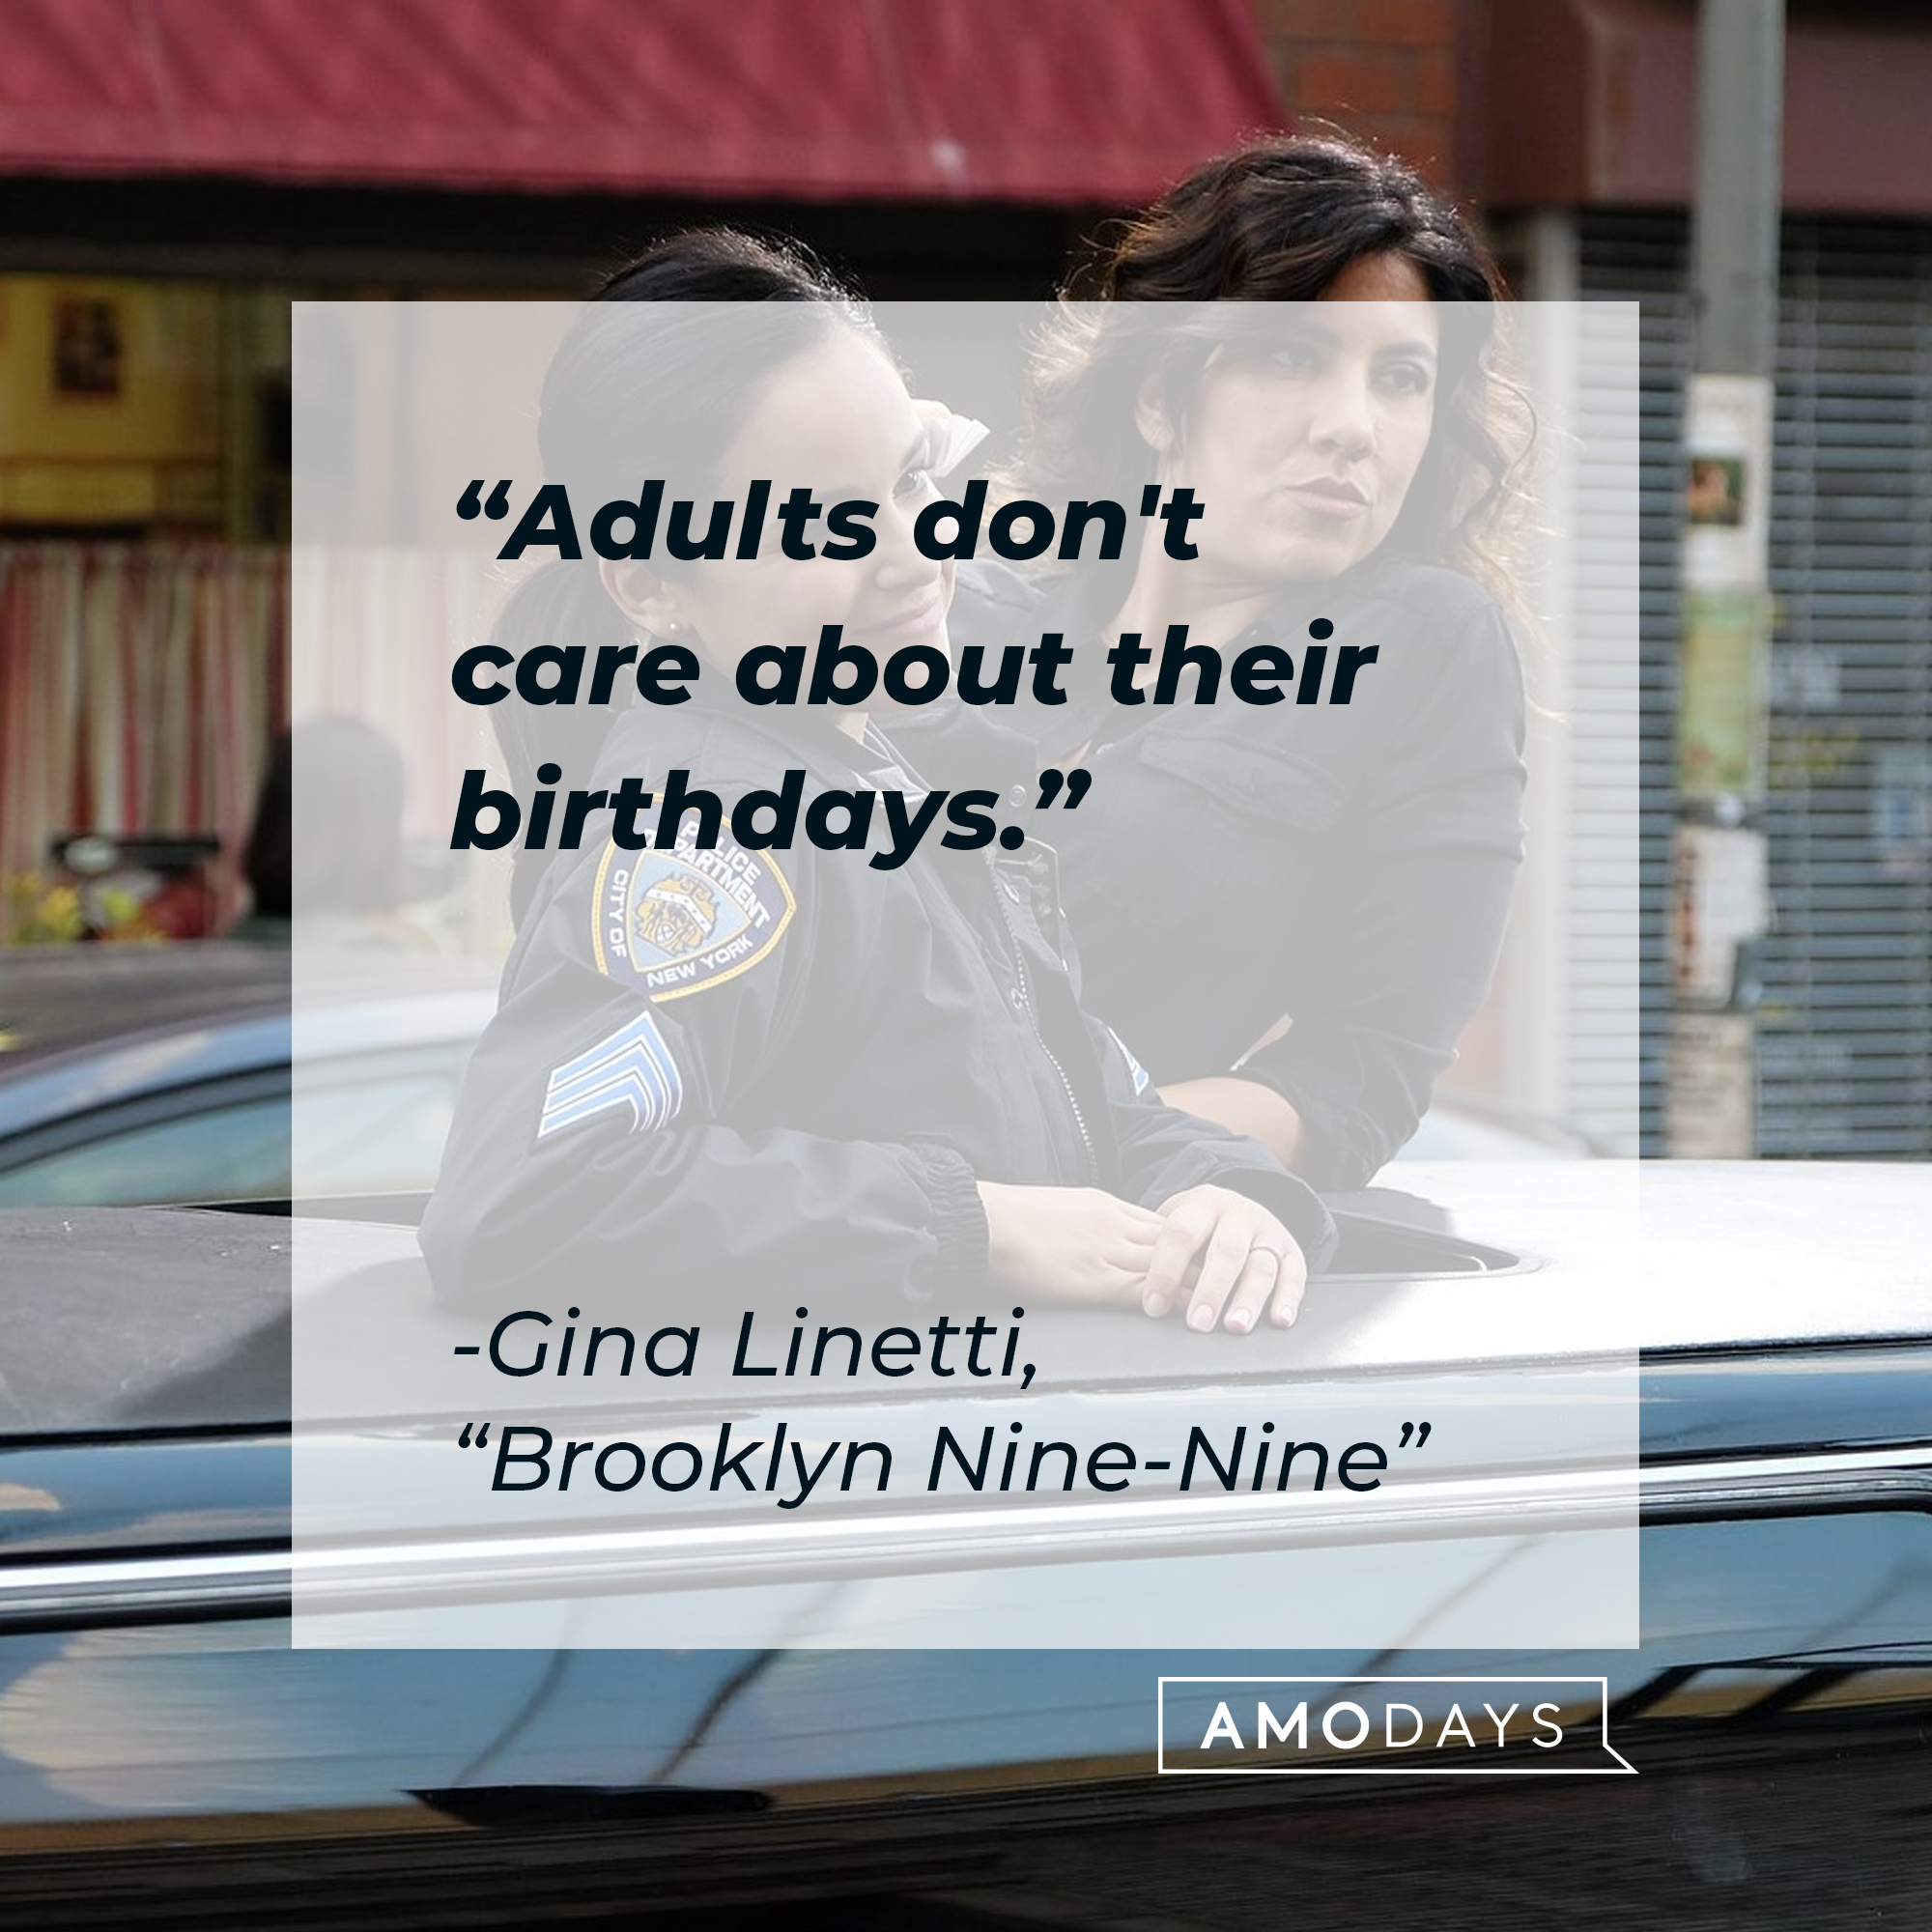 Gina Linetti with her quote: "Adults don't care about their birthdays." | Source: Facebook.com/BrooklynNineNine